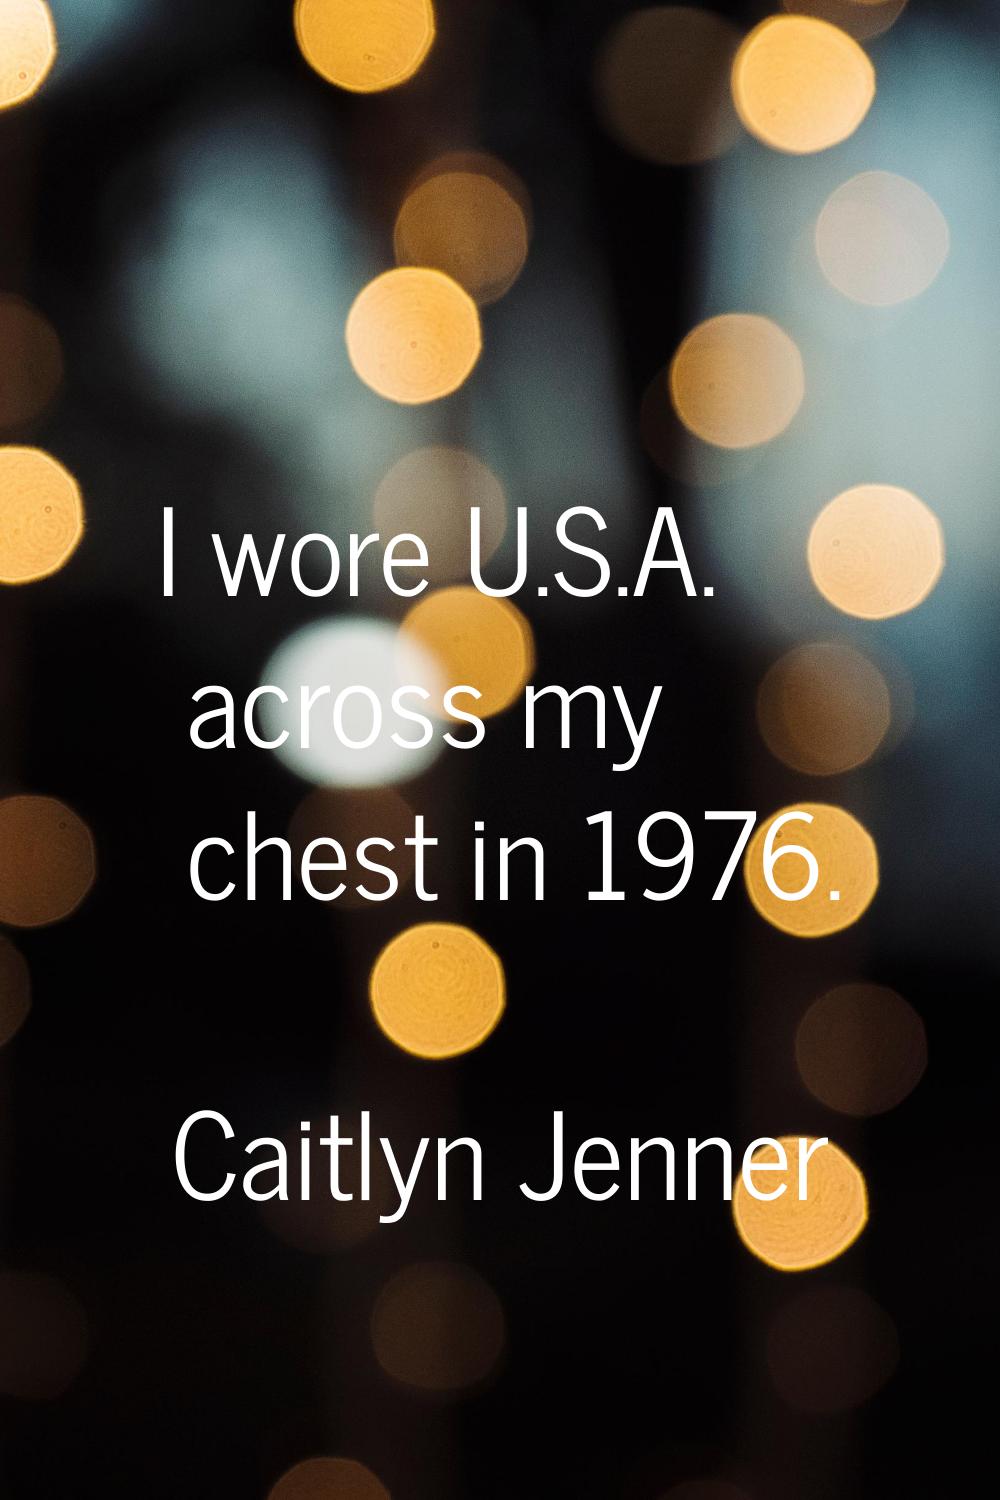 I wore U.S.A. across my chest in 1976.